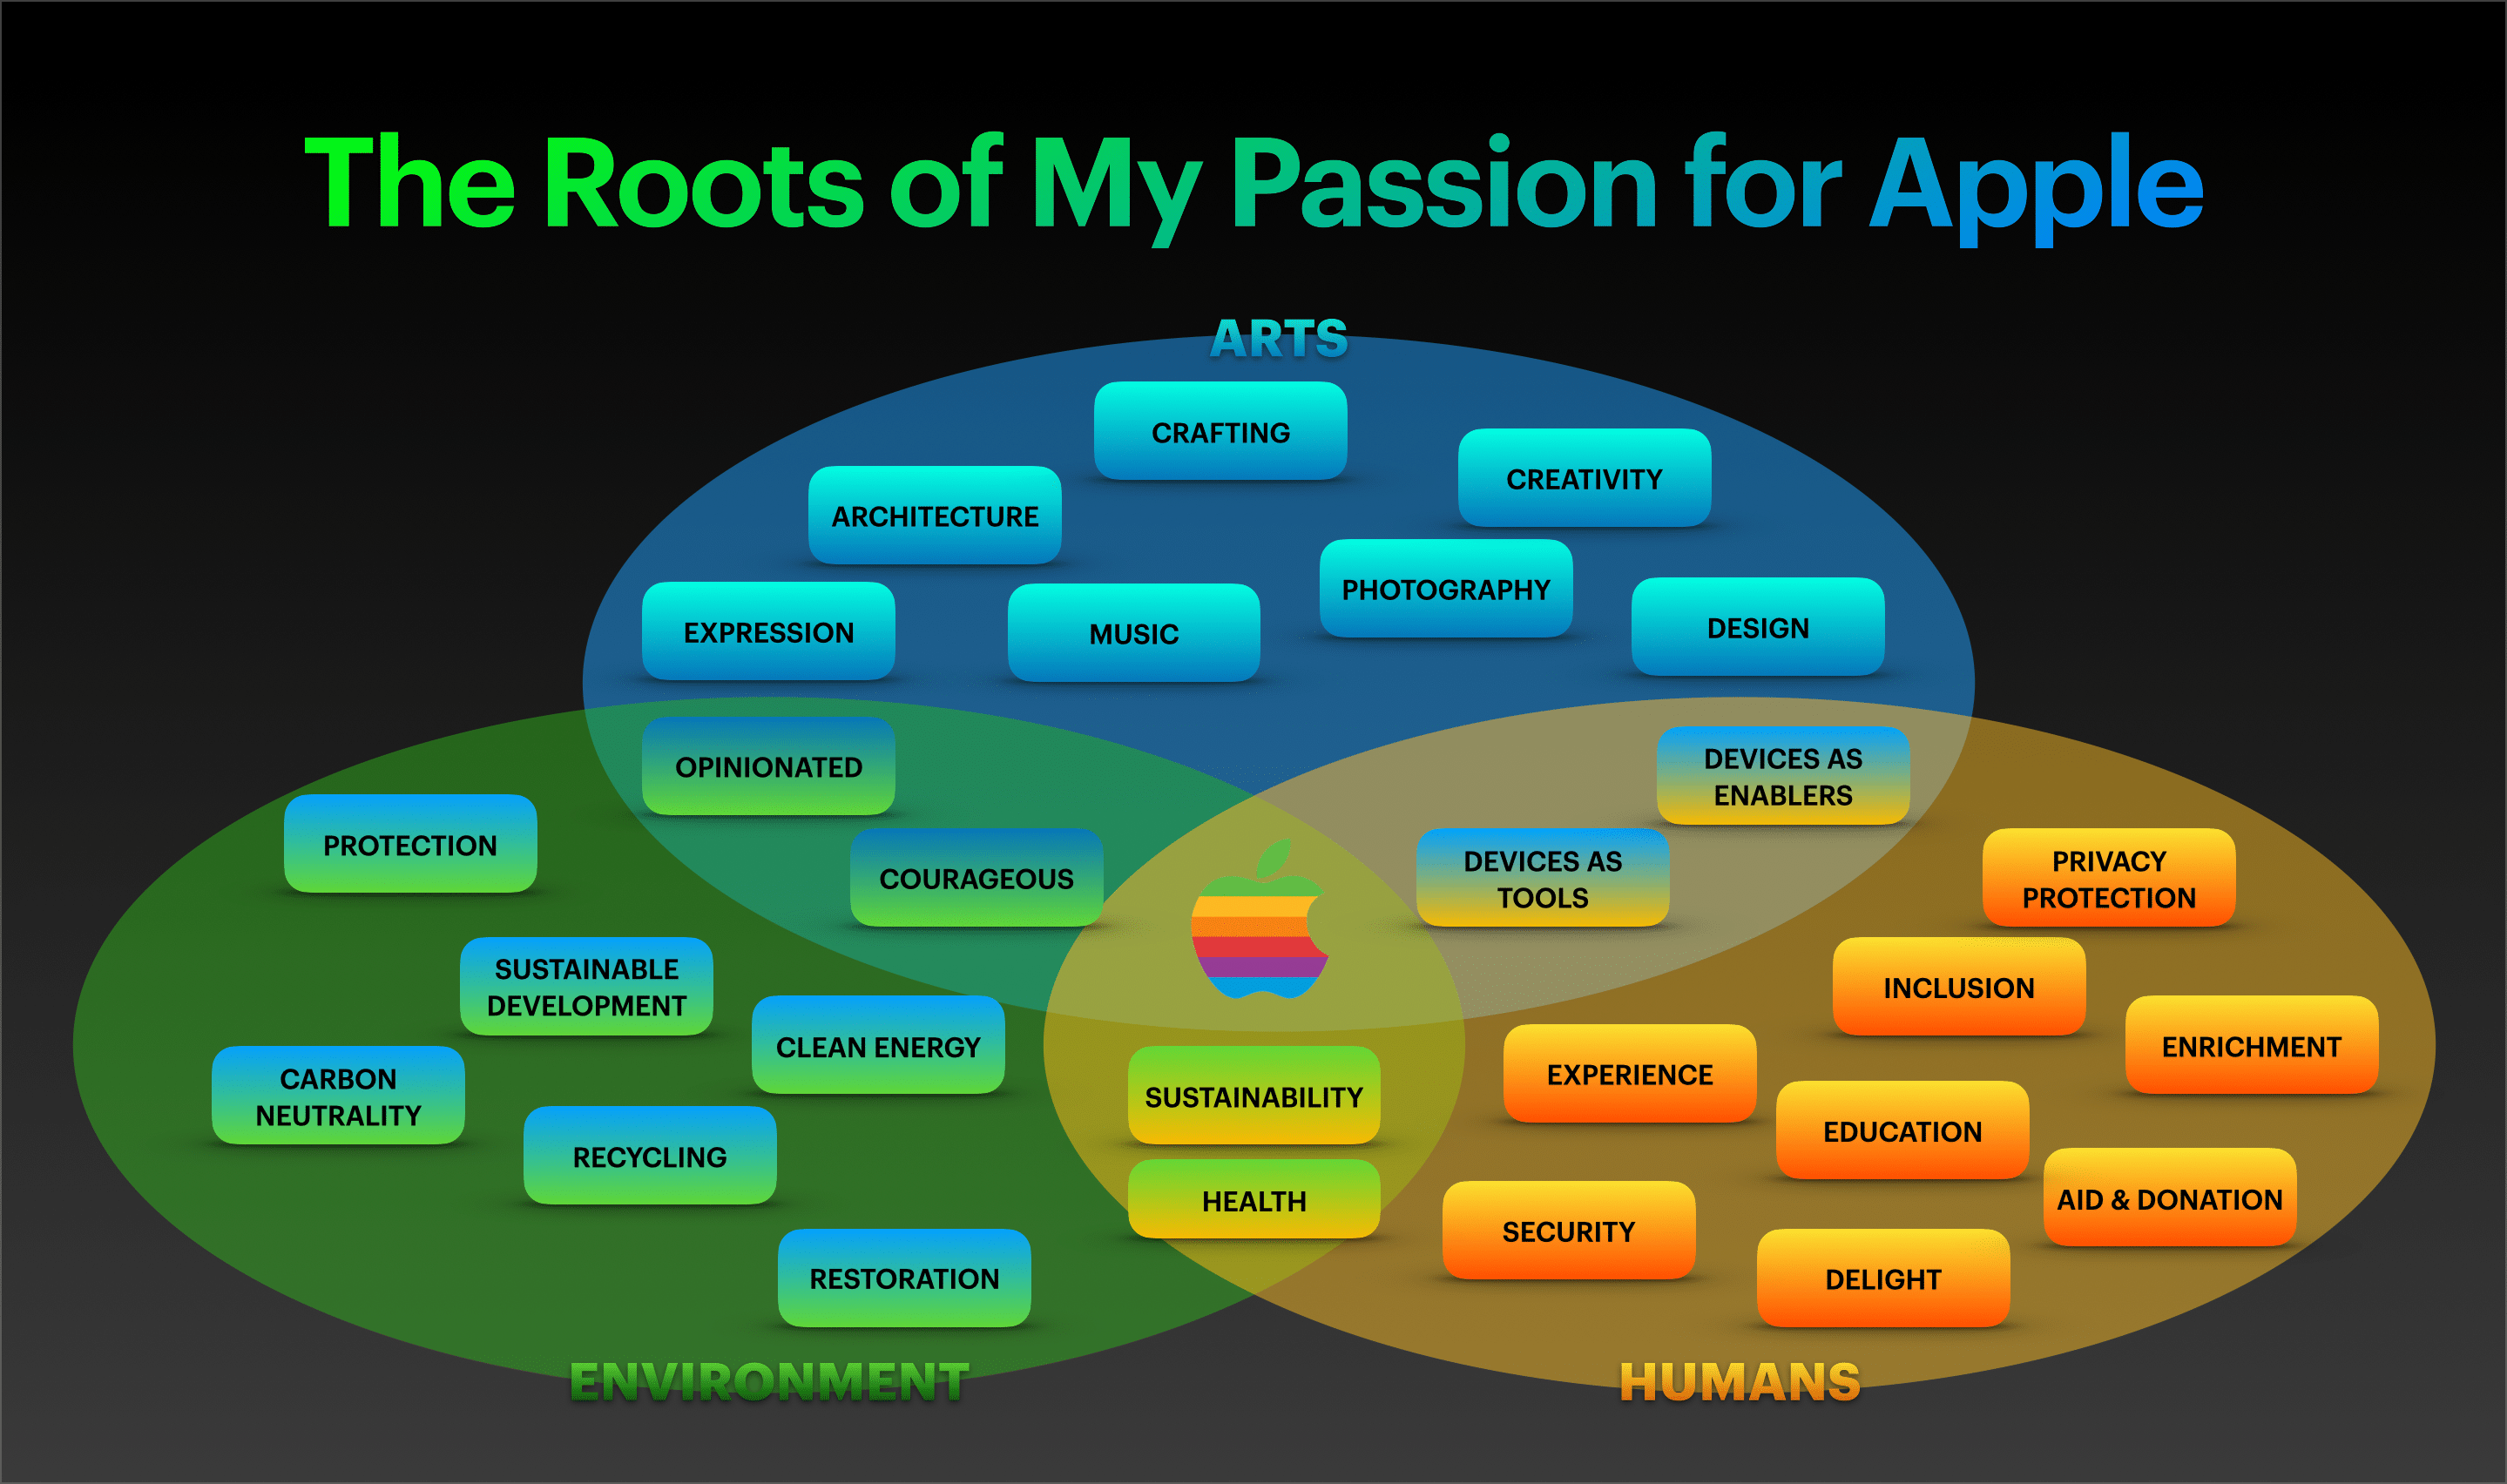 The Roots of My Passion for Apple